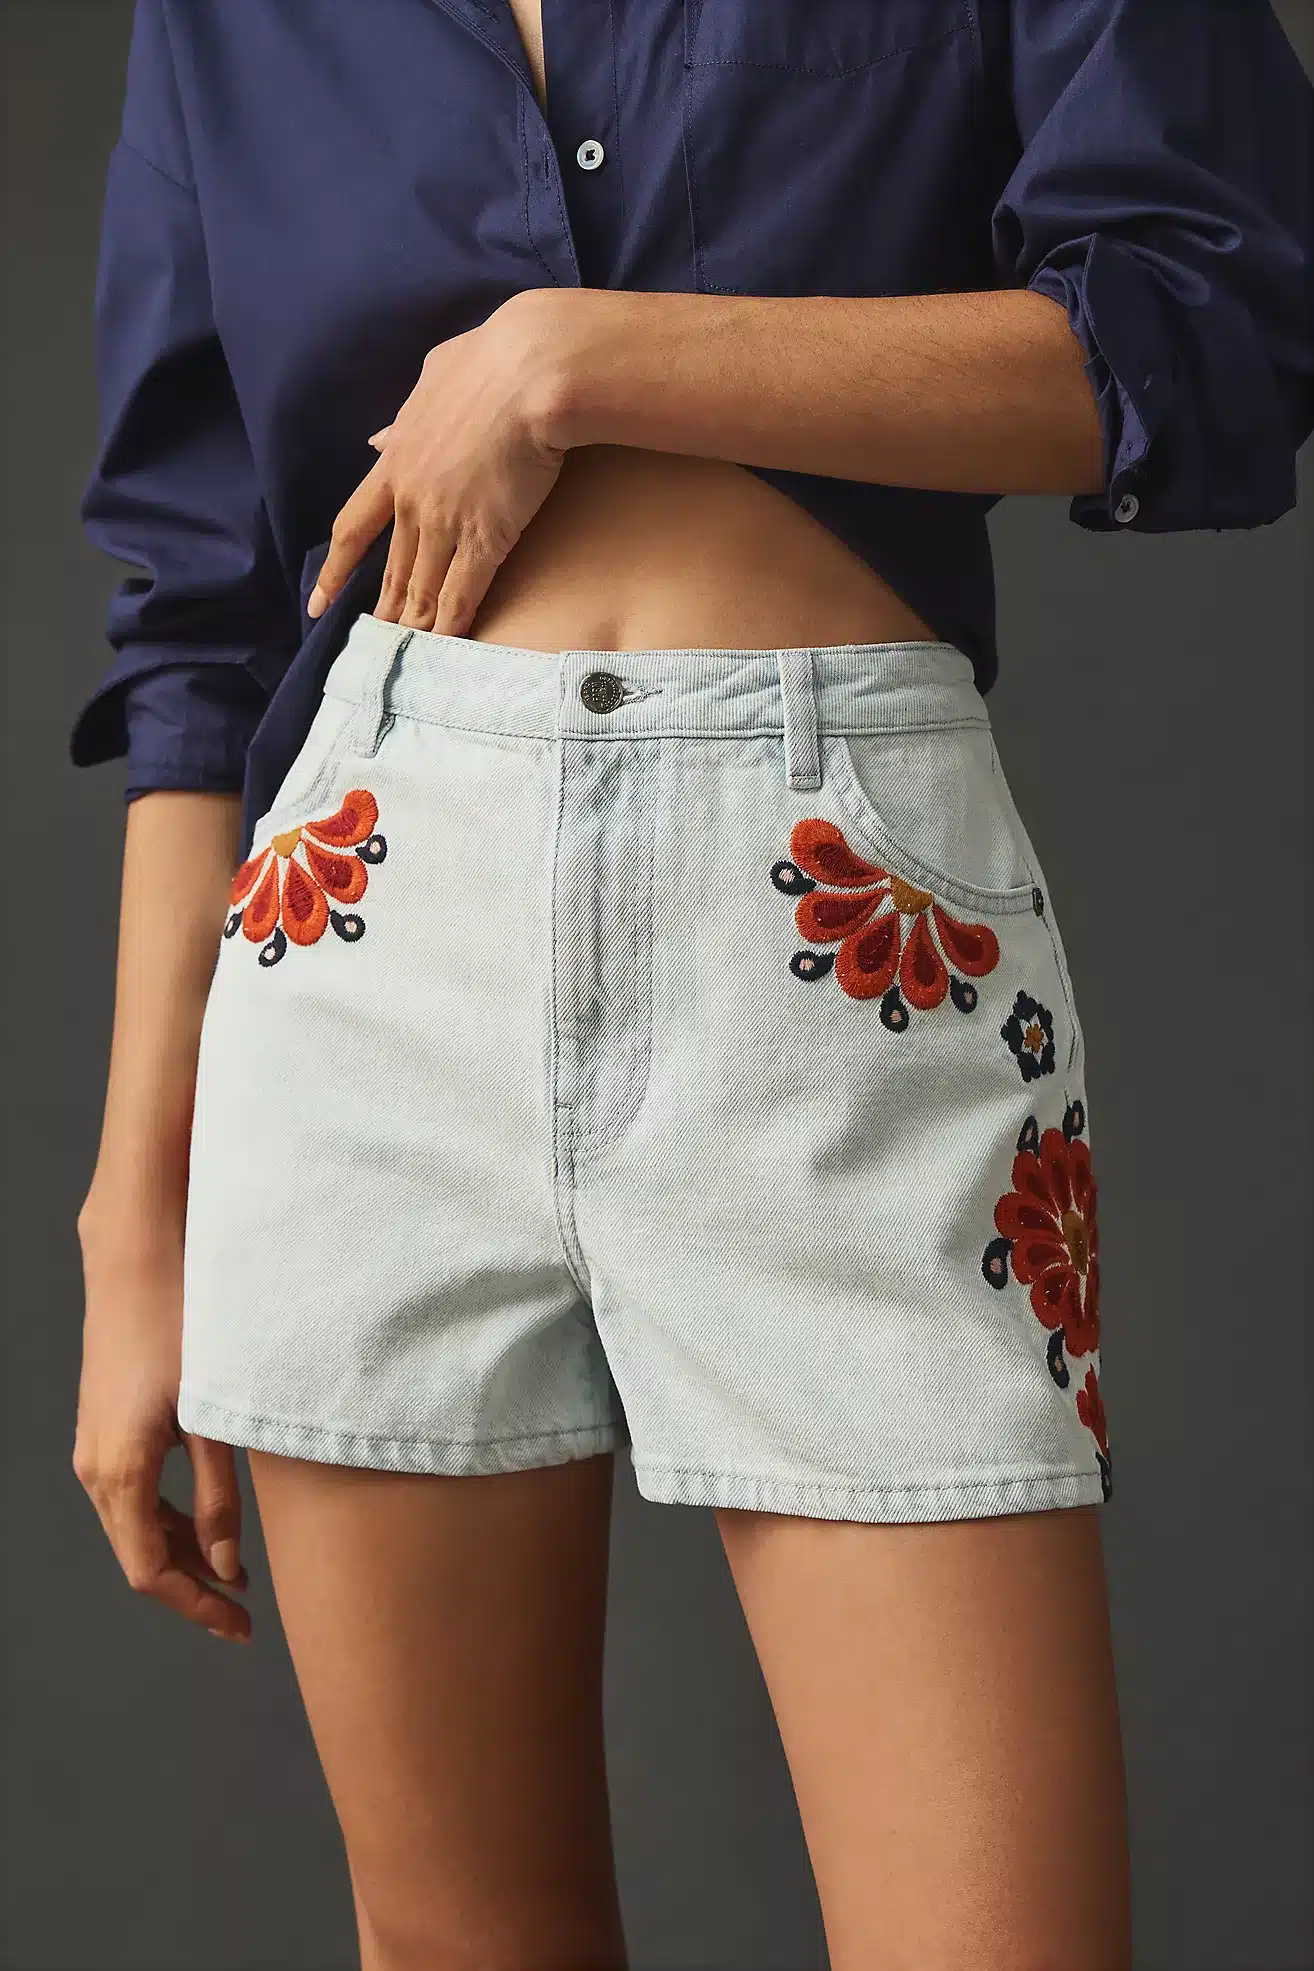 Farm Rio denim shorts in light blue with orange floral embroidery.